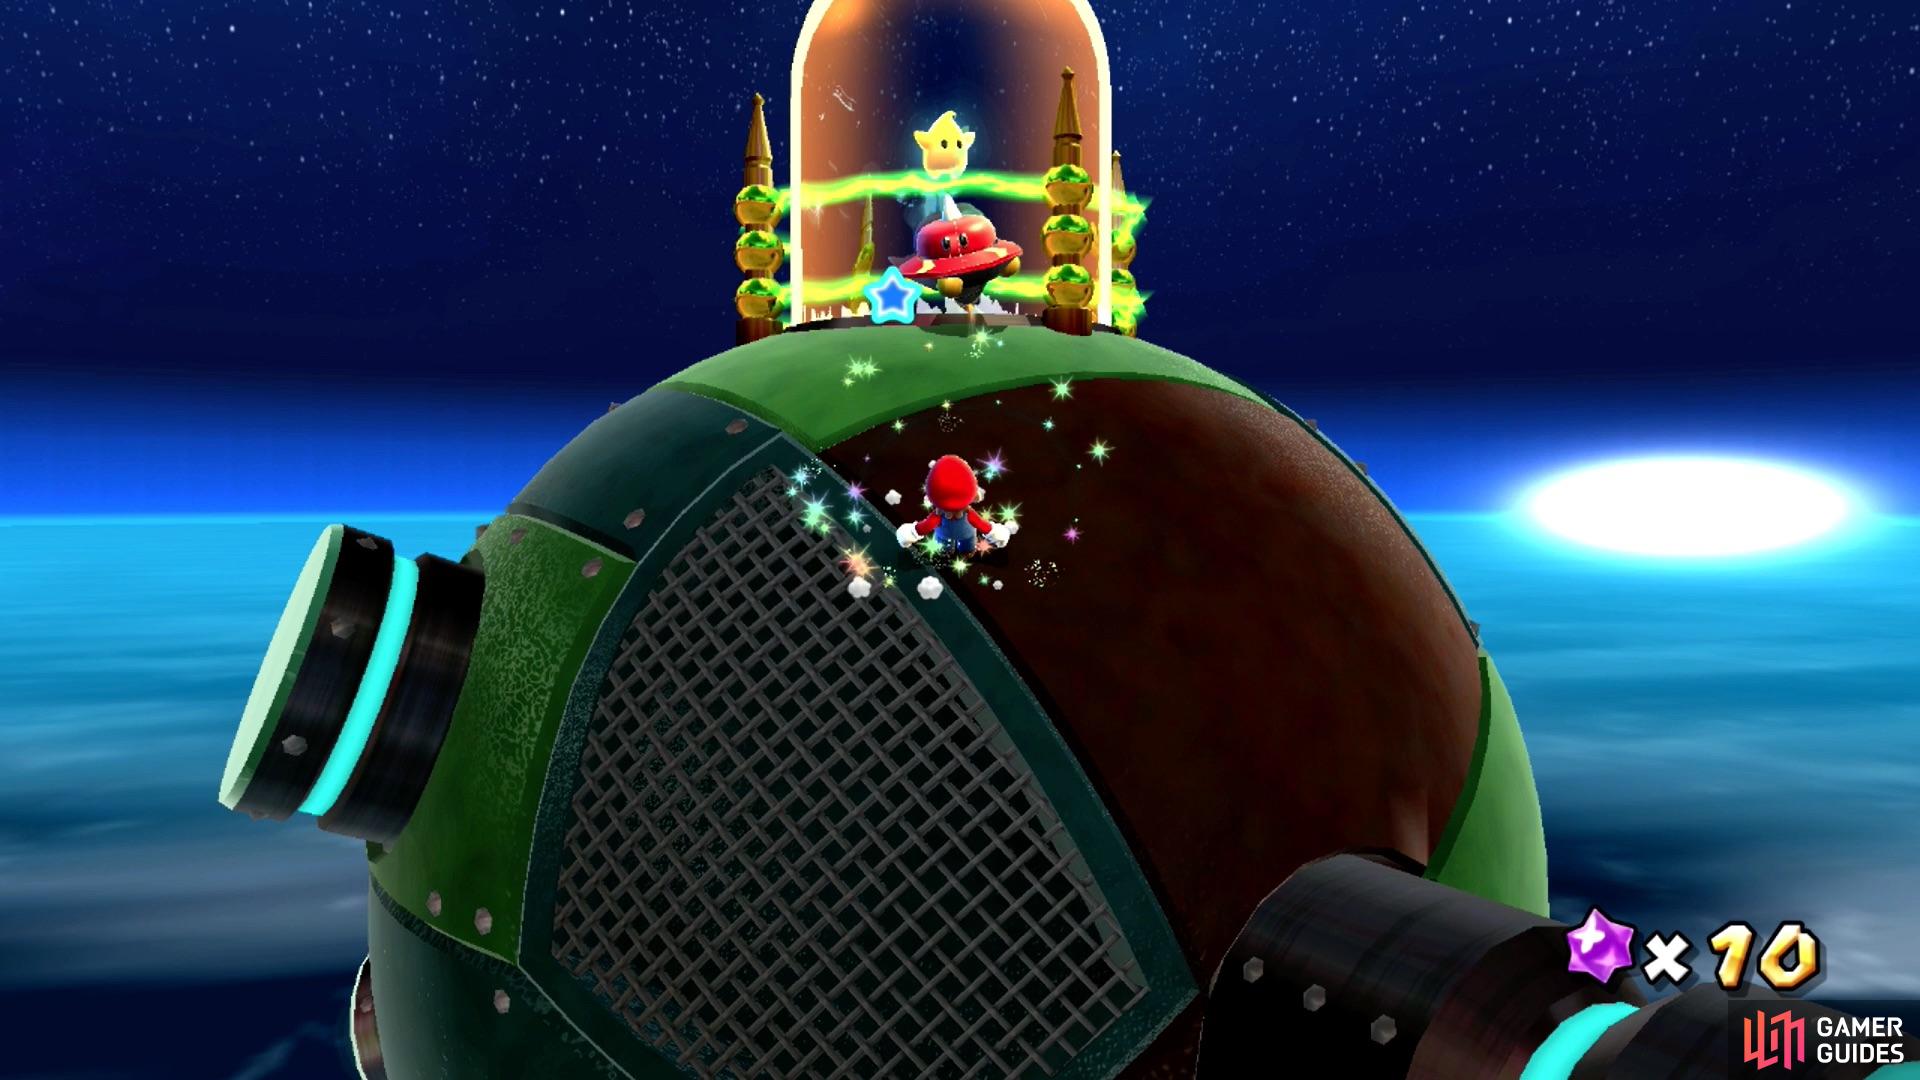 You can knock the Spikey Topman by spin attack or shooting a Star Bit.